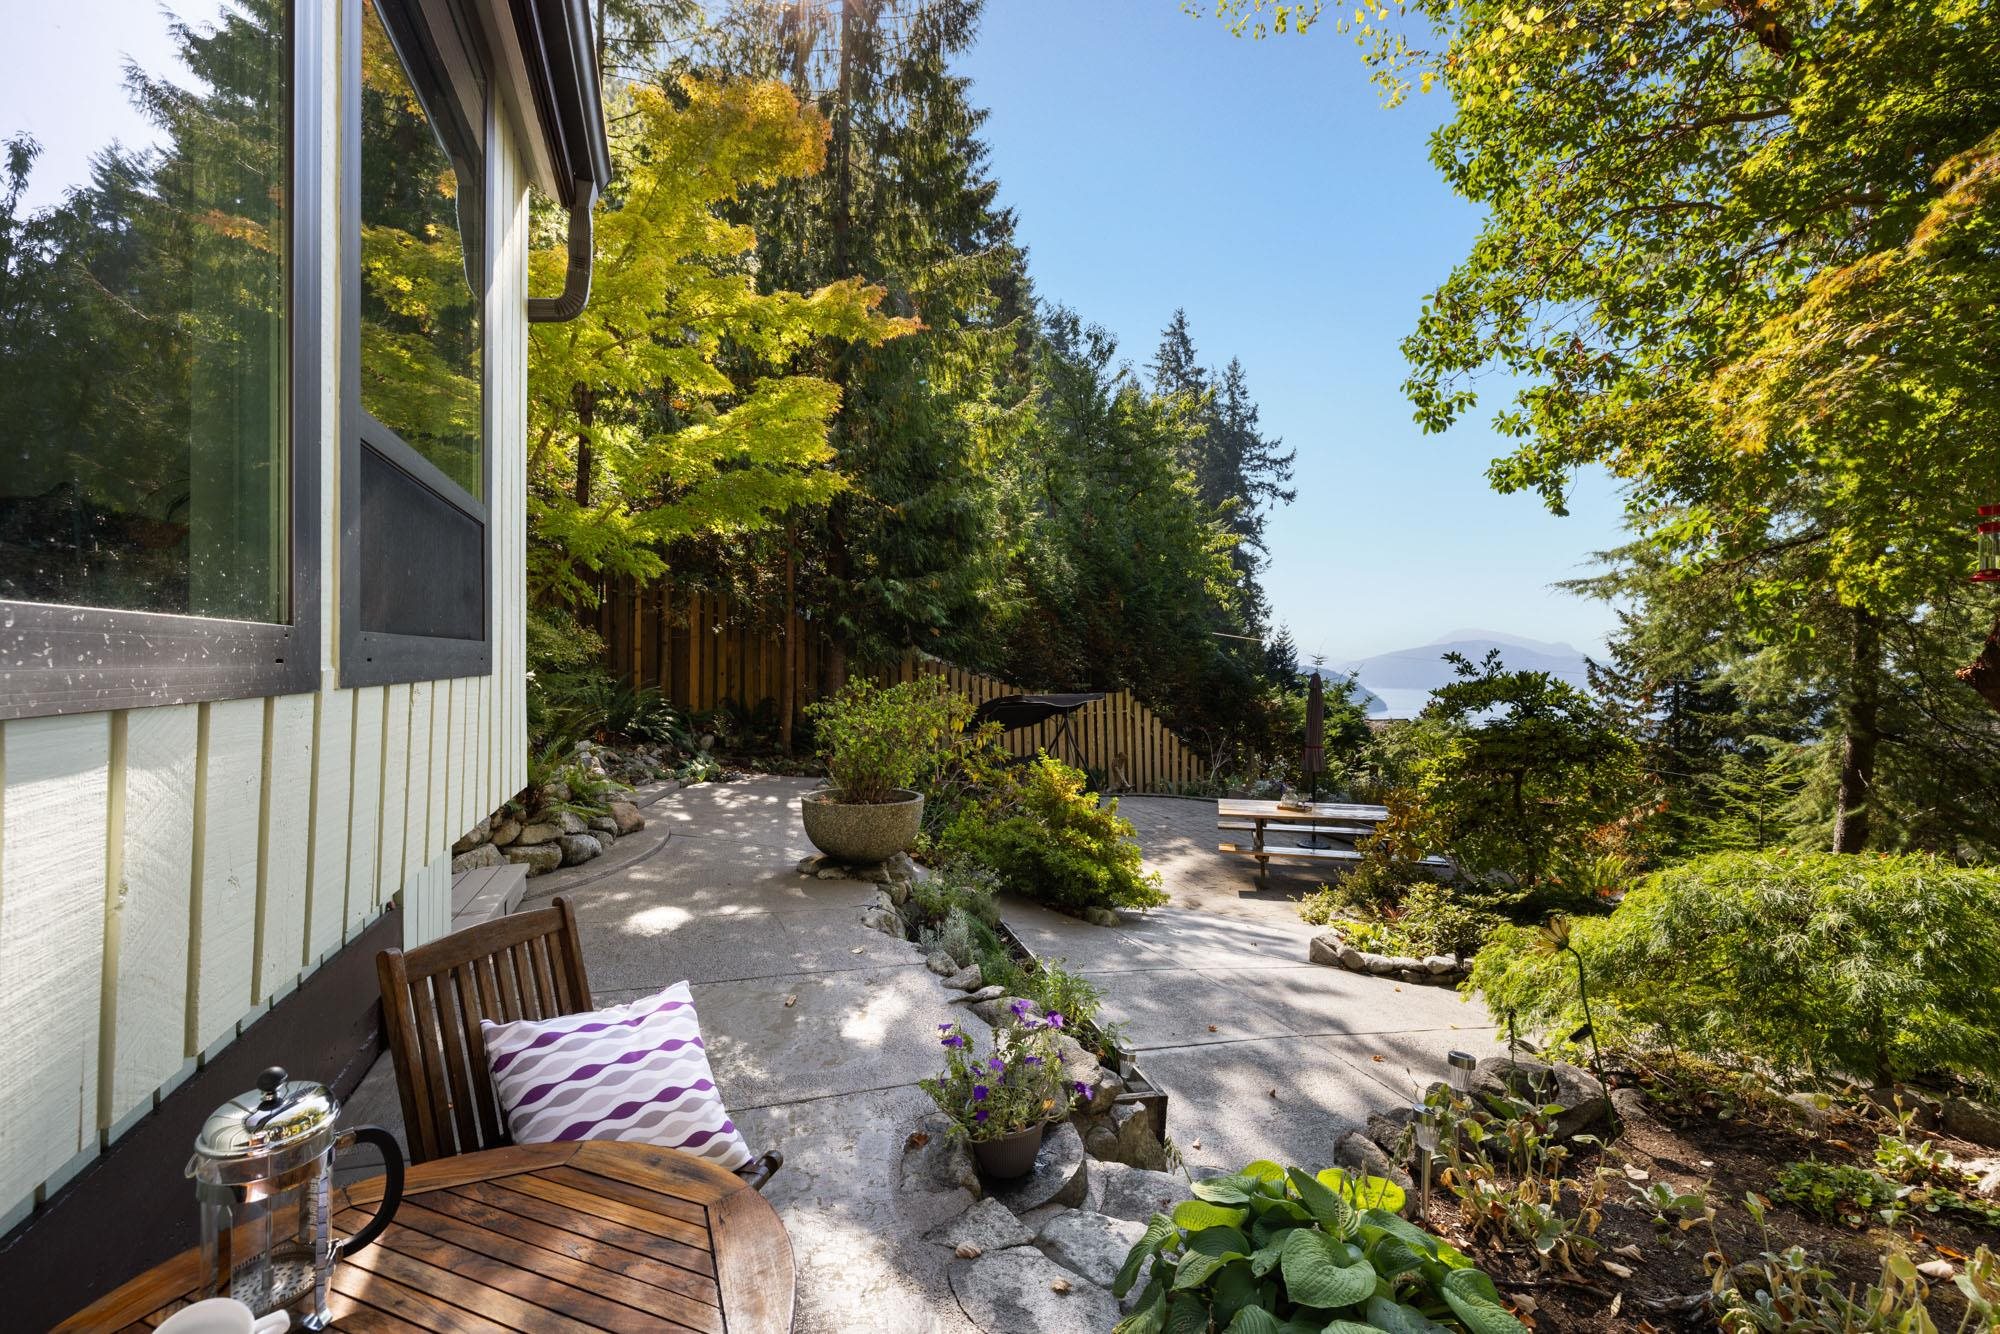 Listing image of 385 OCEANVIEW ROAD